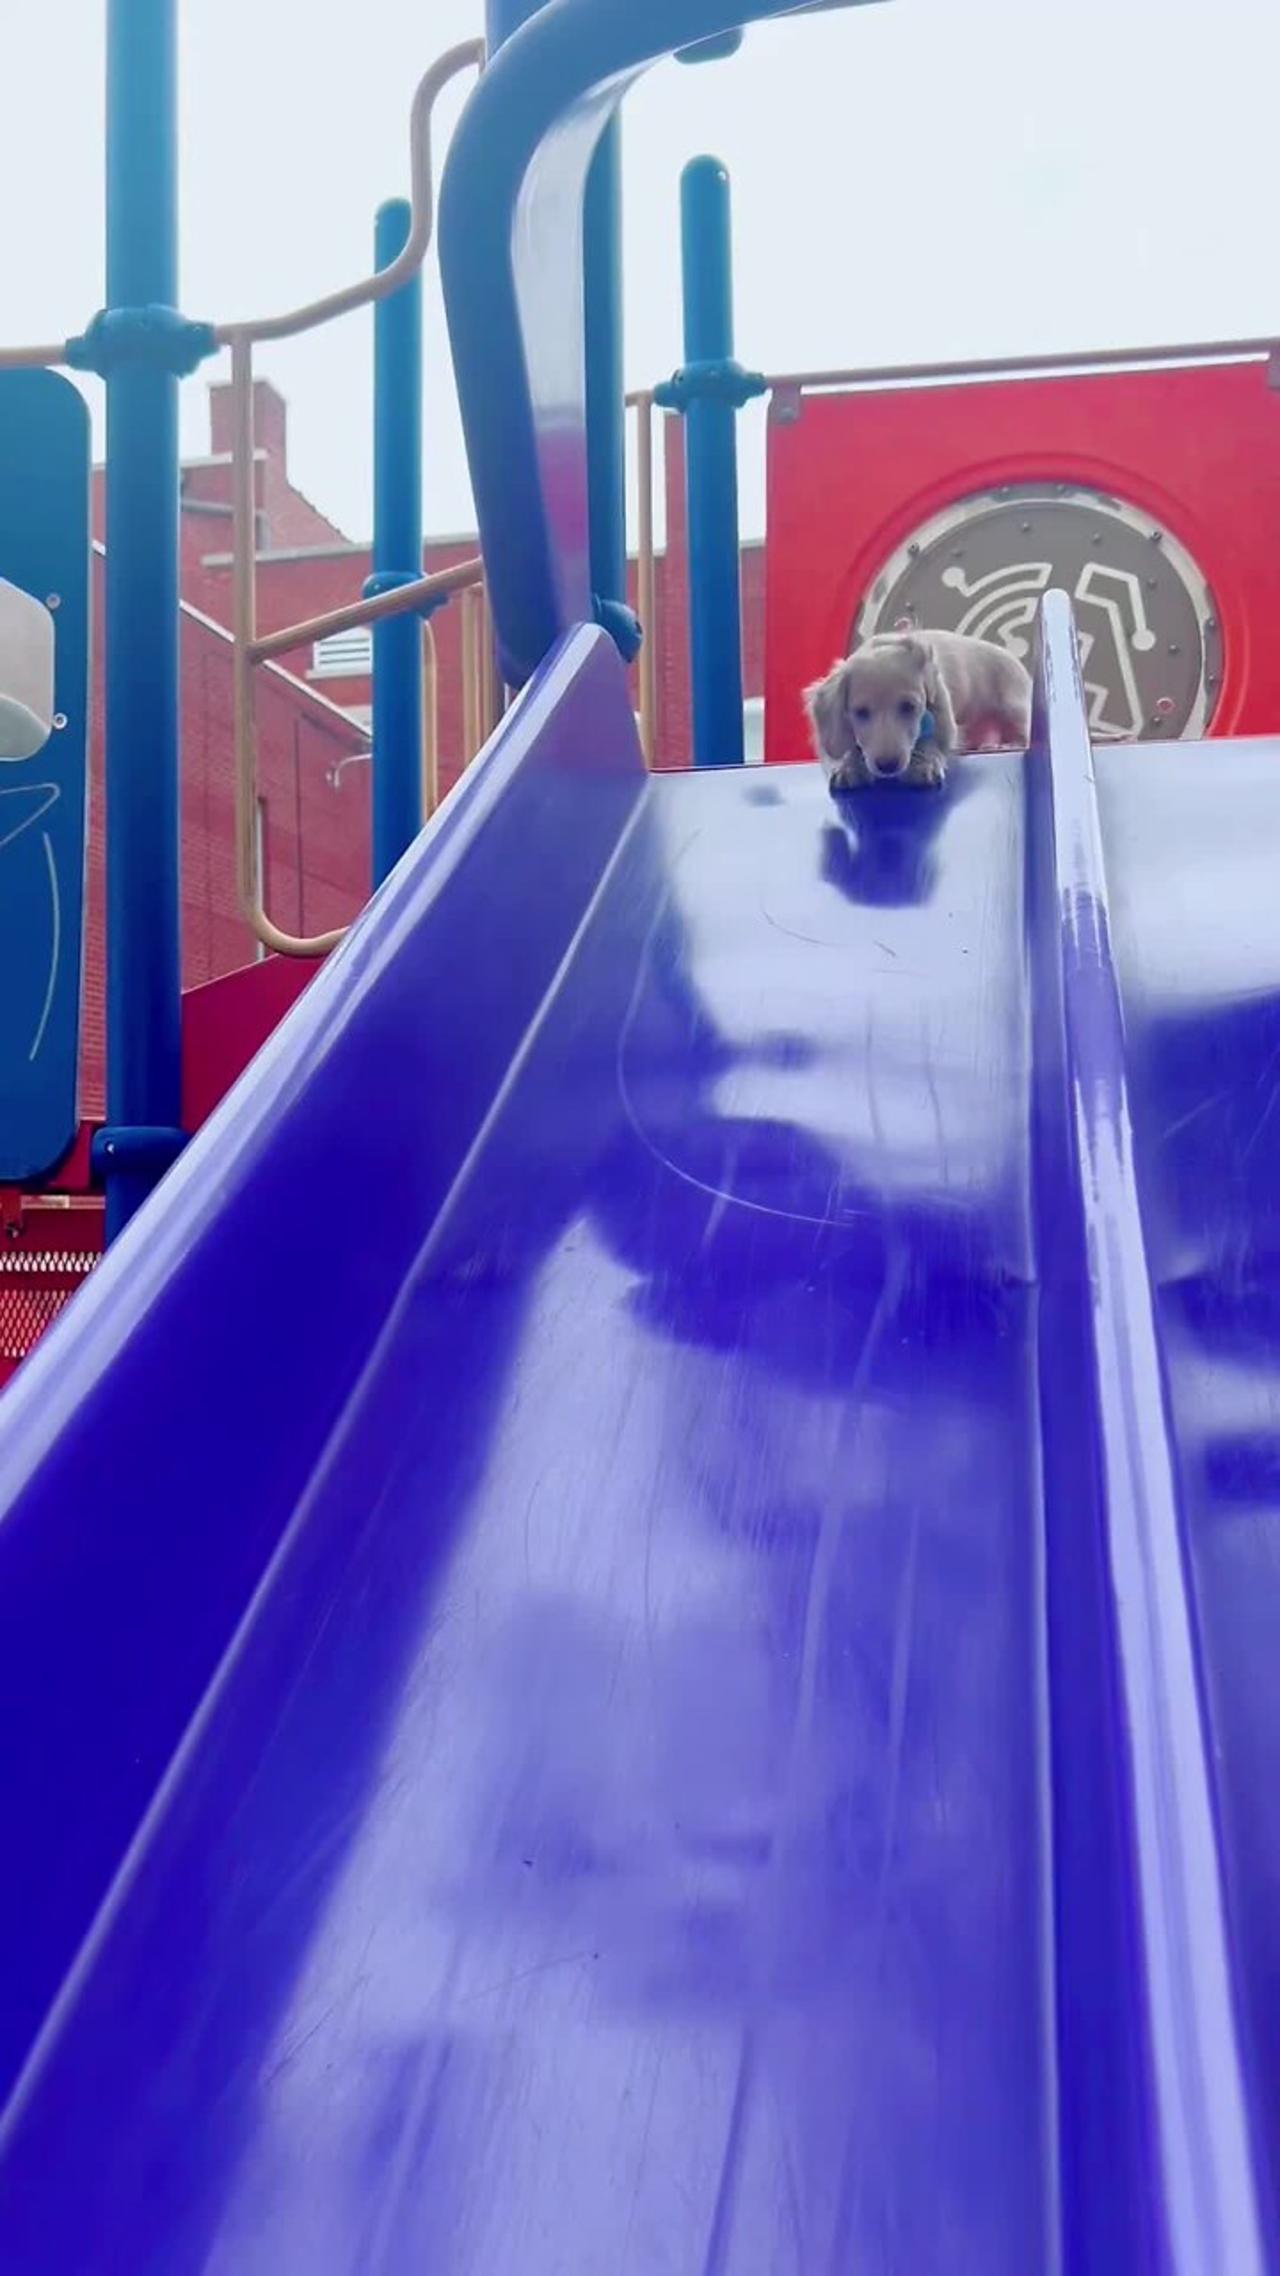 Dachshund puppy does down a slide for the first time!.mov